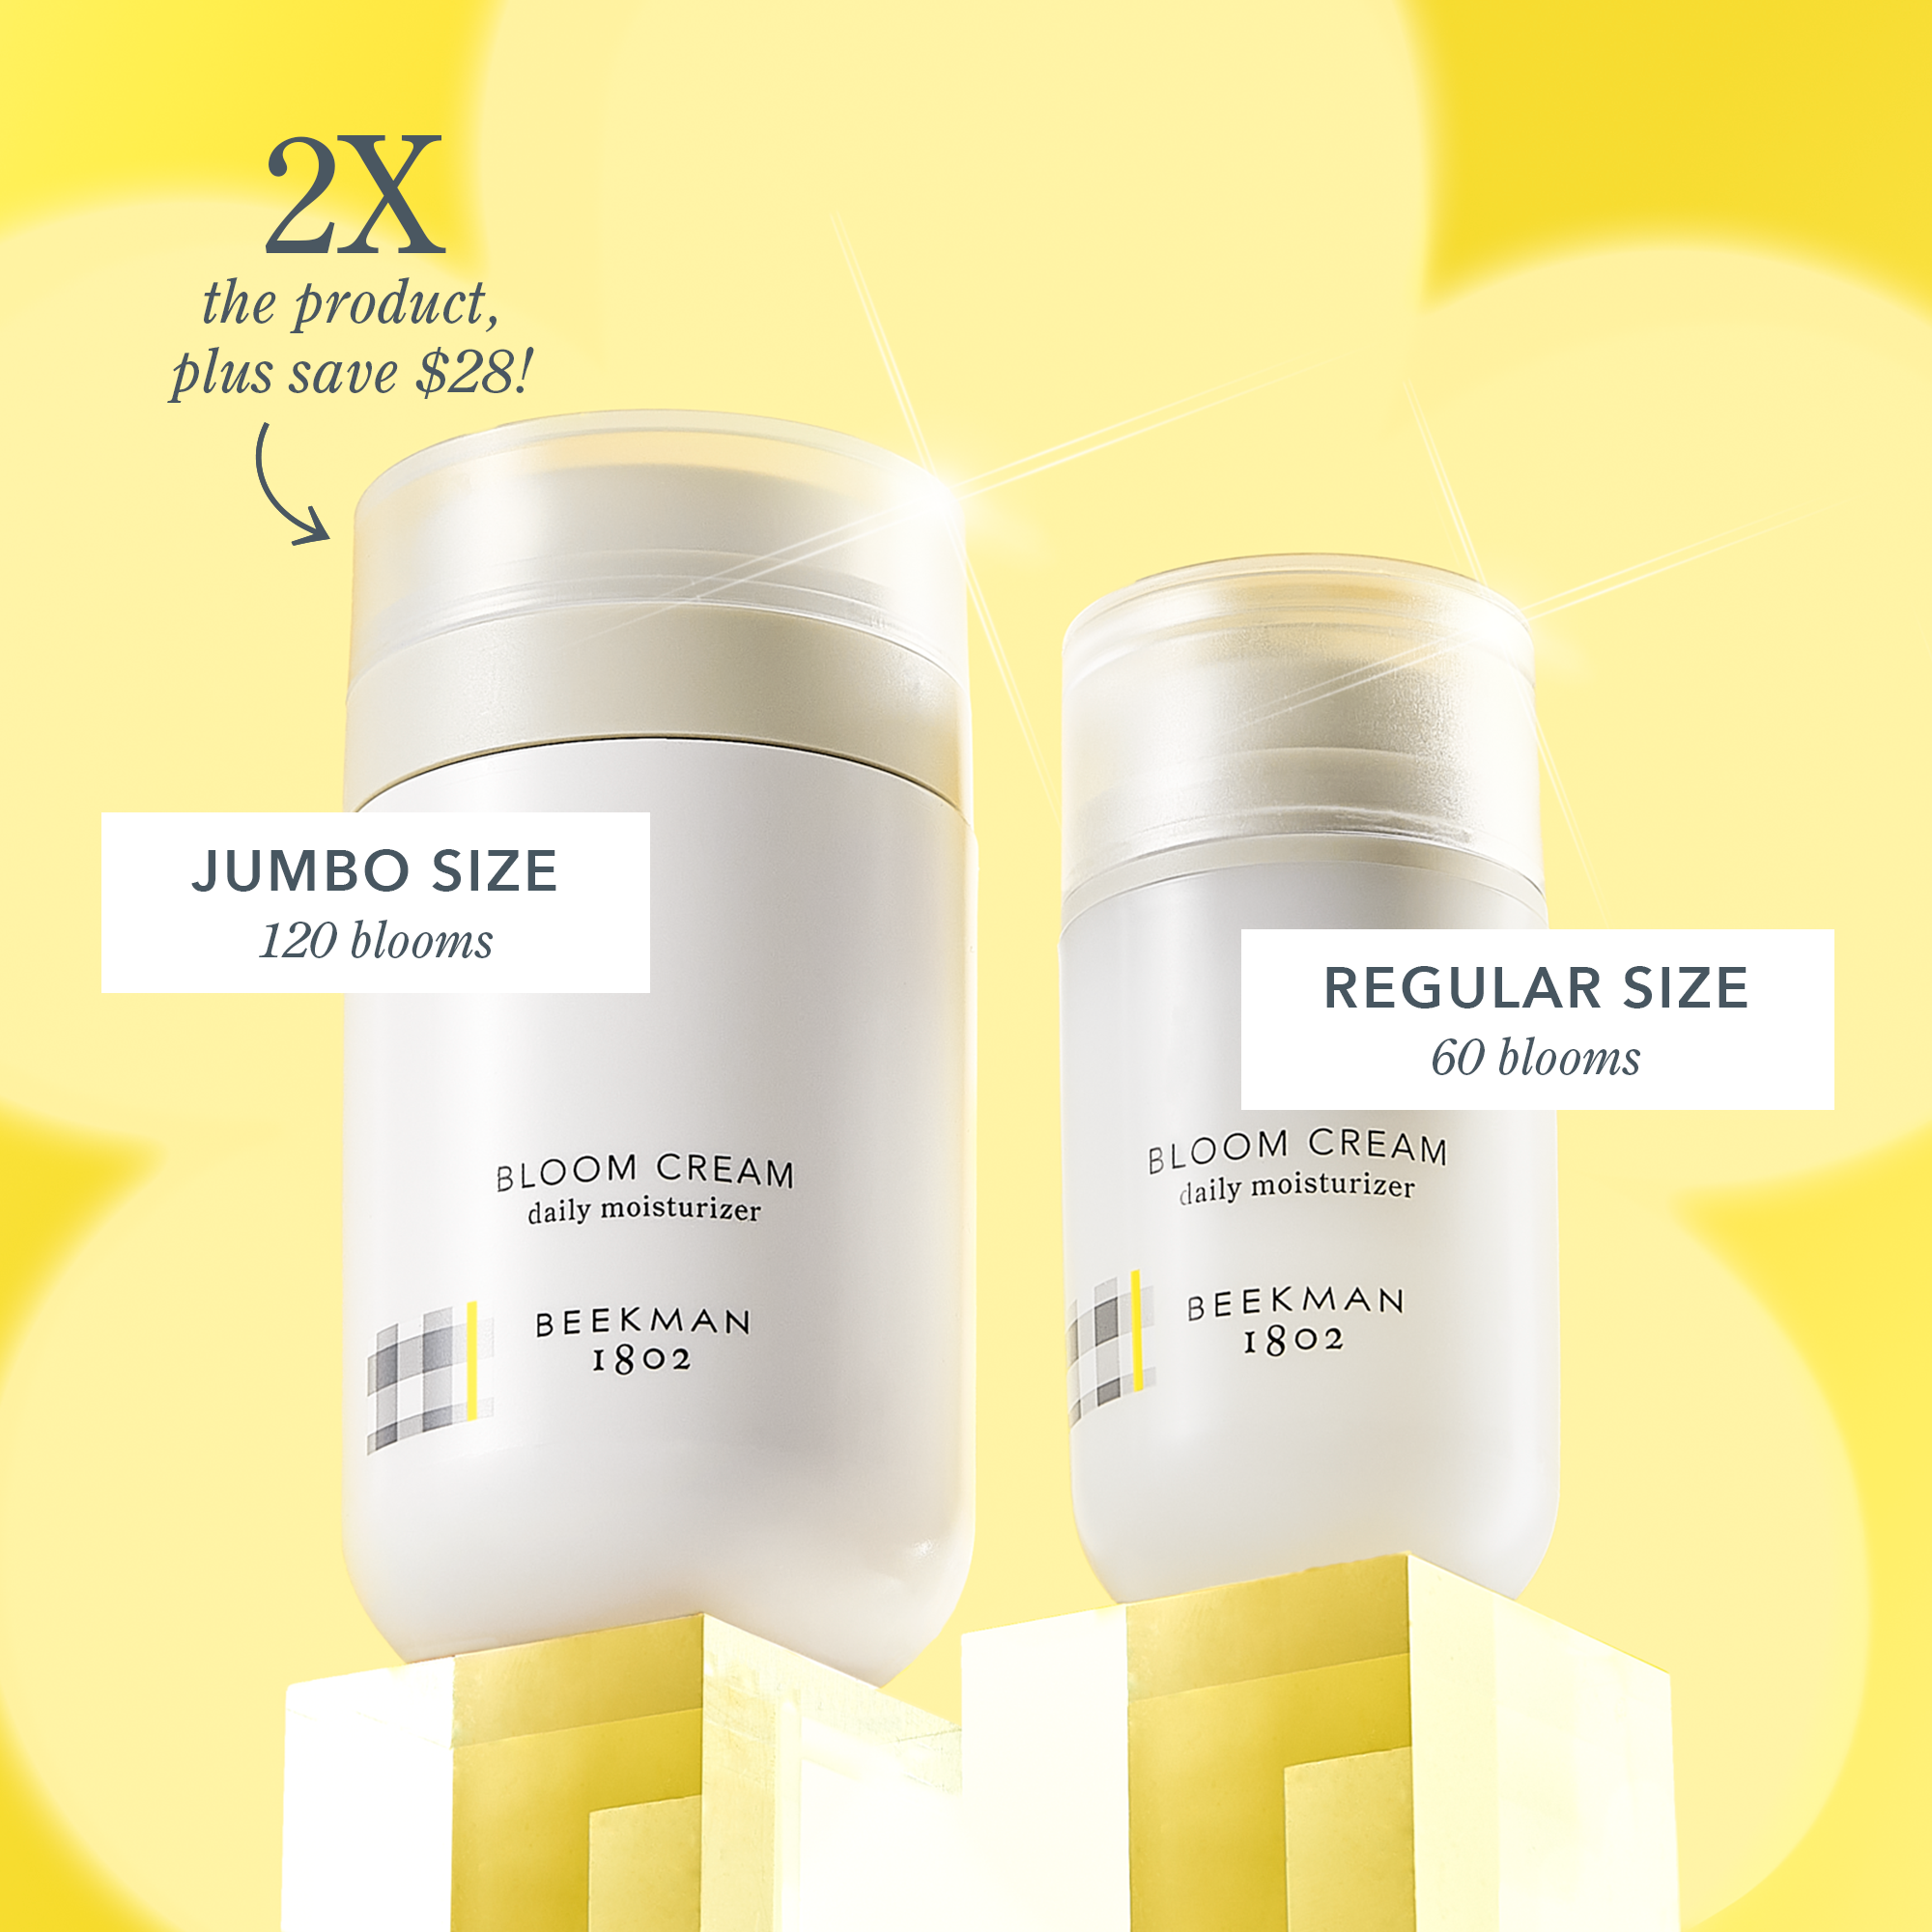 Size comparison image of bottles of the jumbo size bloom cream and the regualar size bloom cream, with the jumbo size on the left with the label 